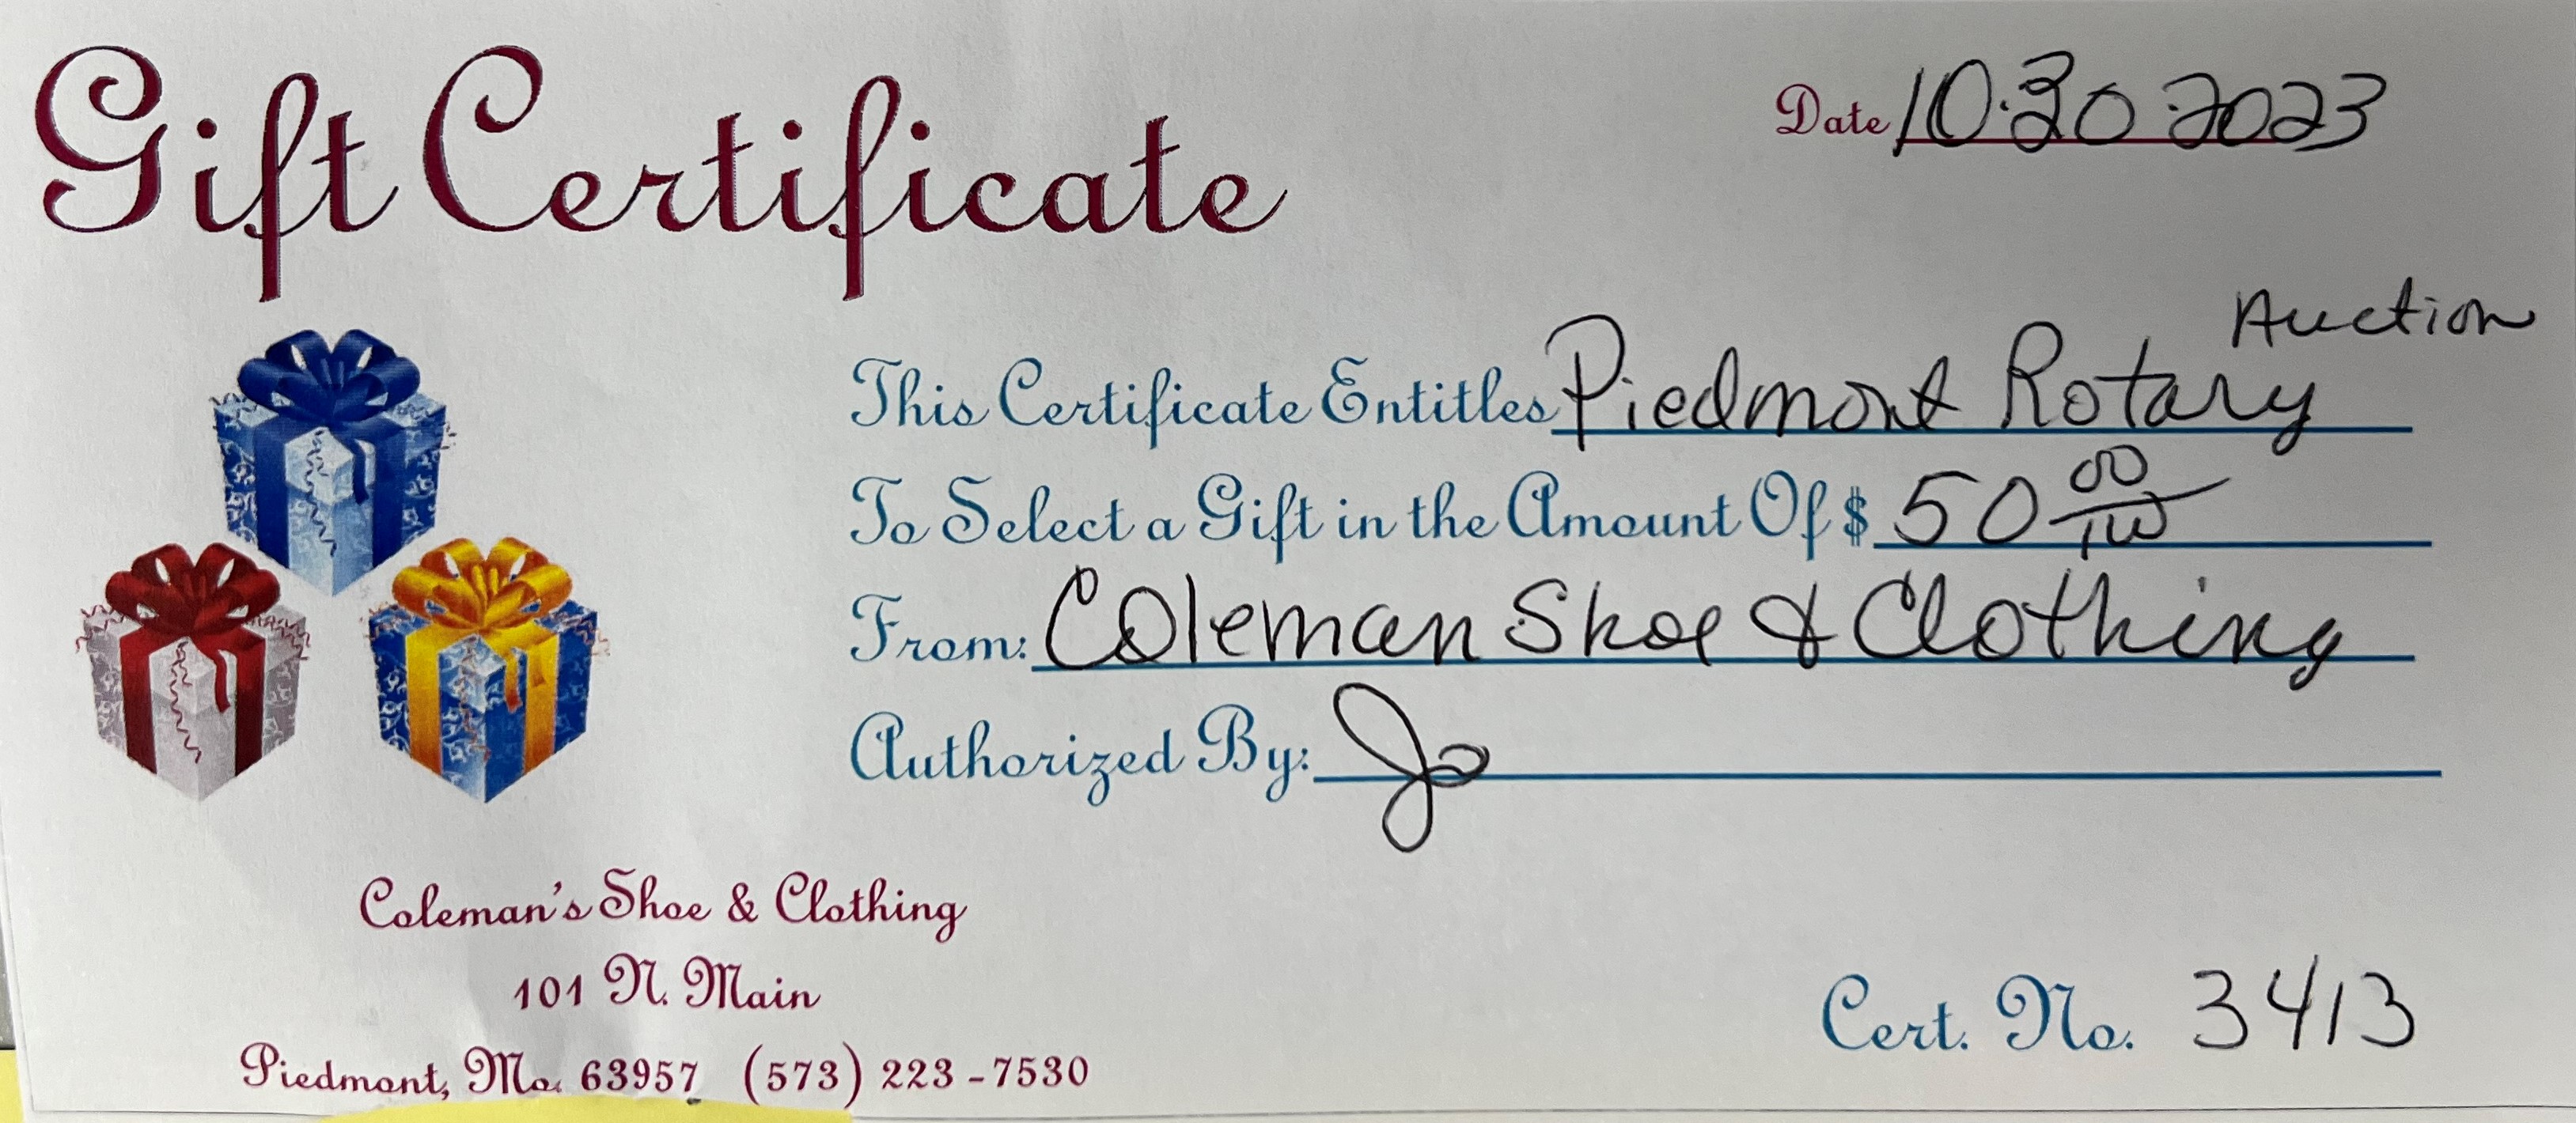 $50 Gift Certificate for Coleman's 